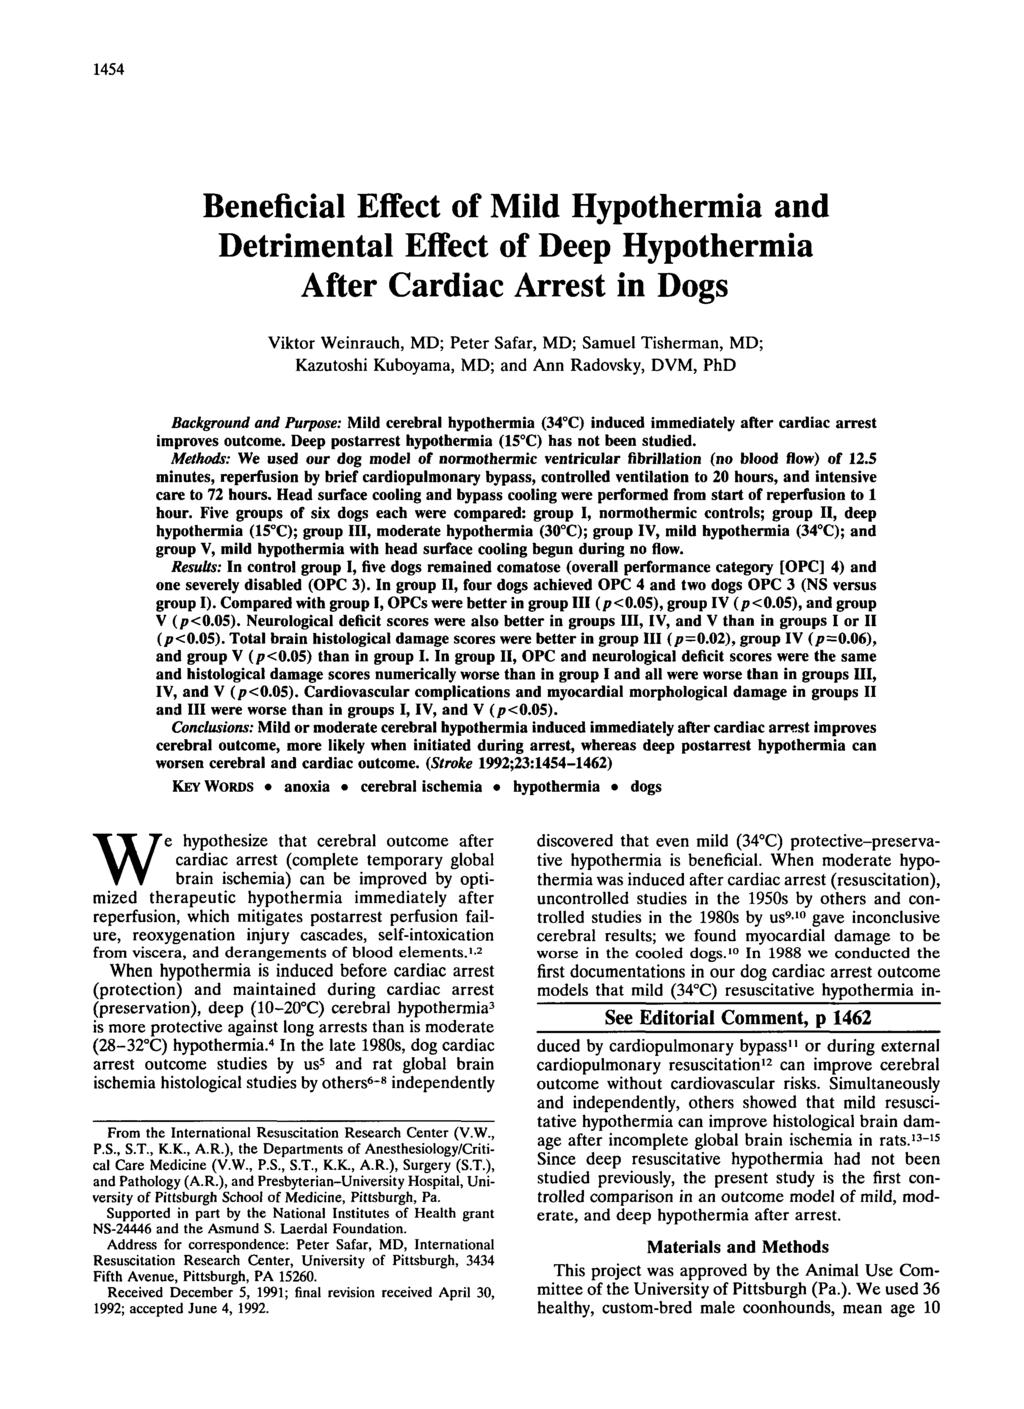 1454 Beneficial Effect of Mild Hypothermia and Detrimental Effect of Deep Hypothermia After Cardiac Arrest in Dogs Viktor Weinrauch, MD; Peter Safar, MD; Samuel Tisherman, MD; Kazutoshi Kuboyama, MD;